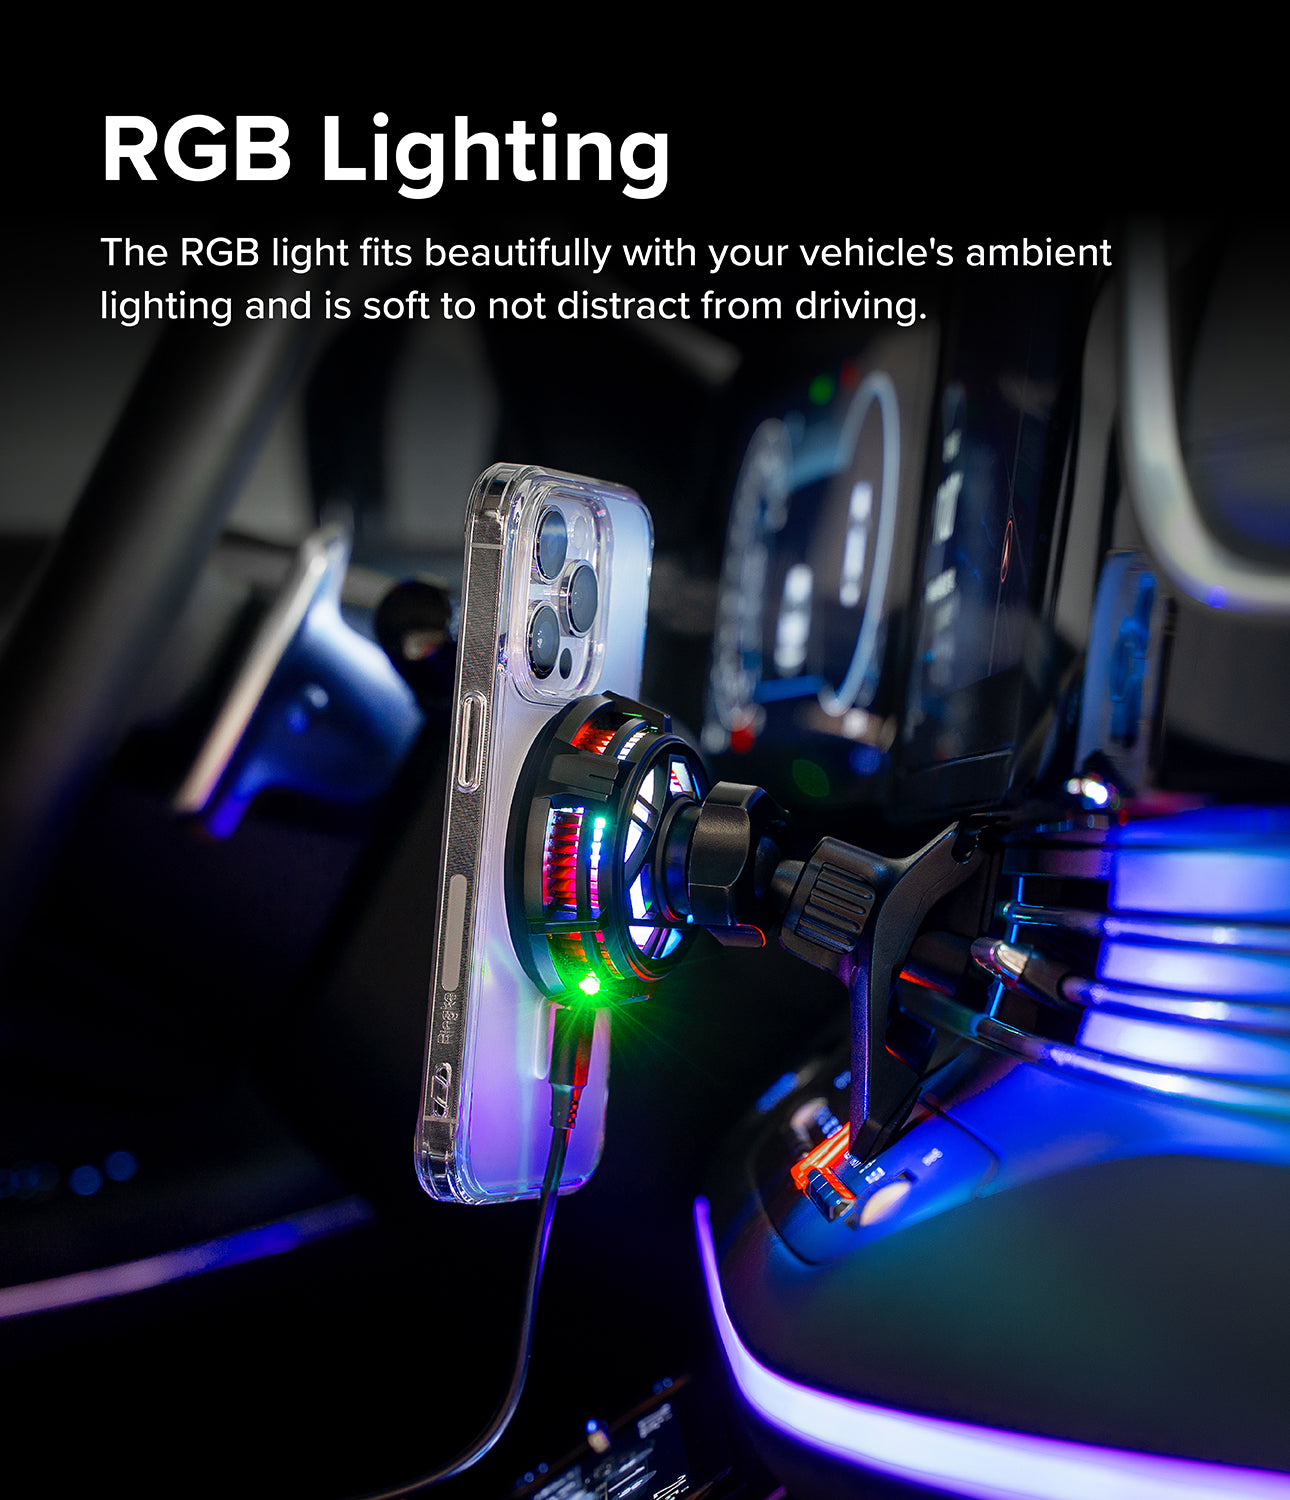 Ringke Peltier Magnetic Car Charger Mount - RGB Lighting. The RGB light fits beautifully with your vehicle's ambient lighting and is soft to not distract from driving.